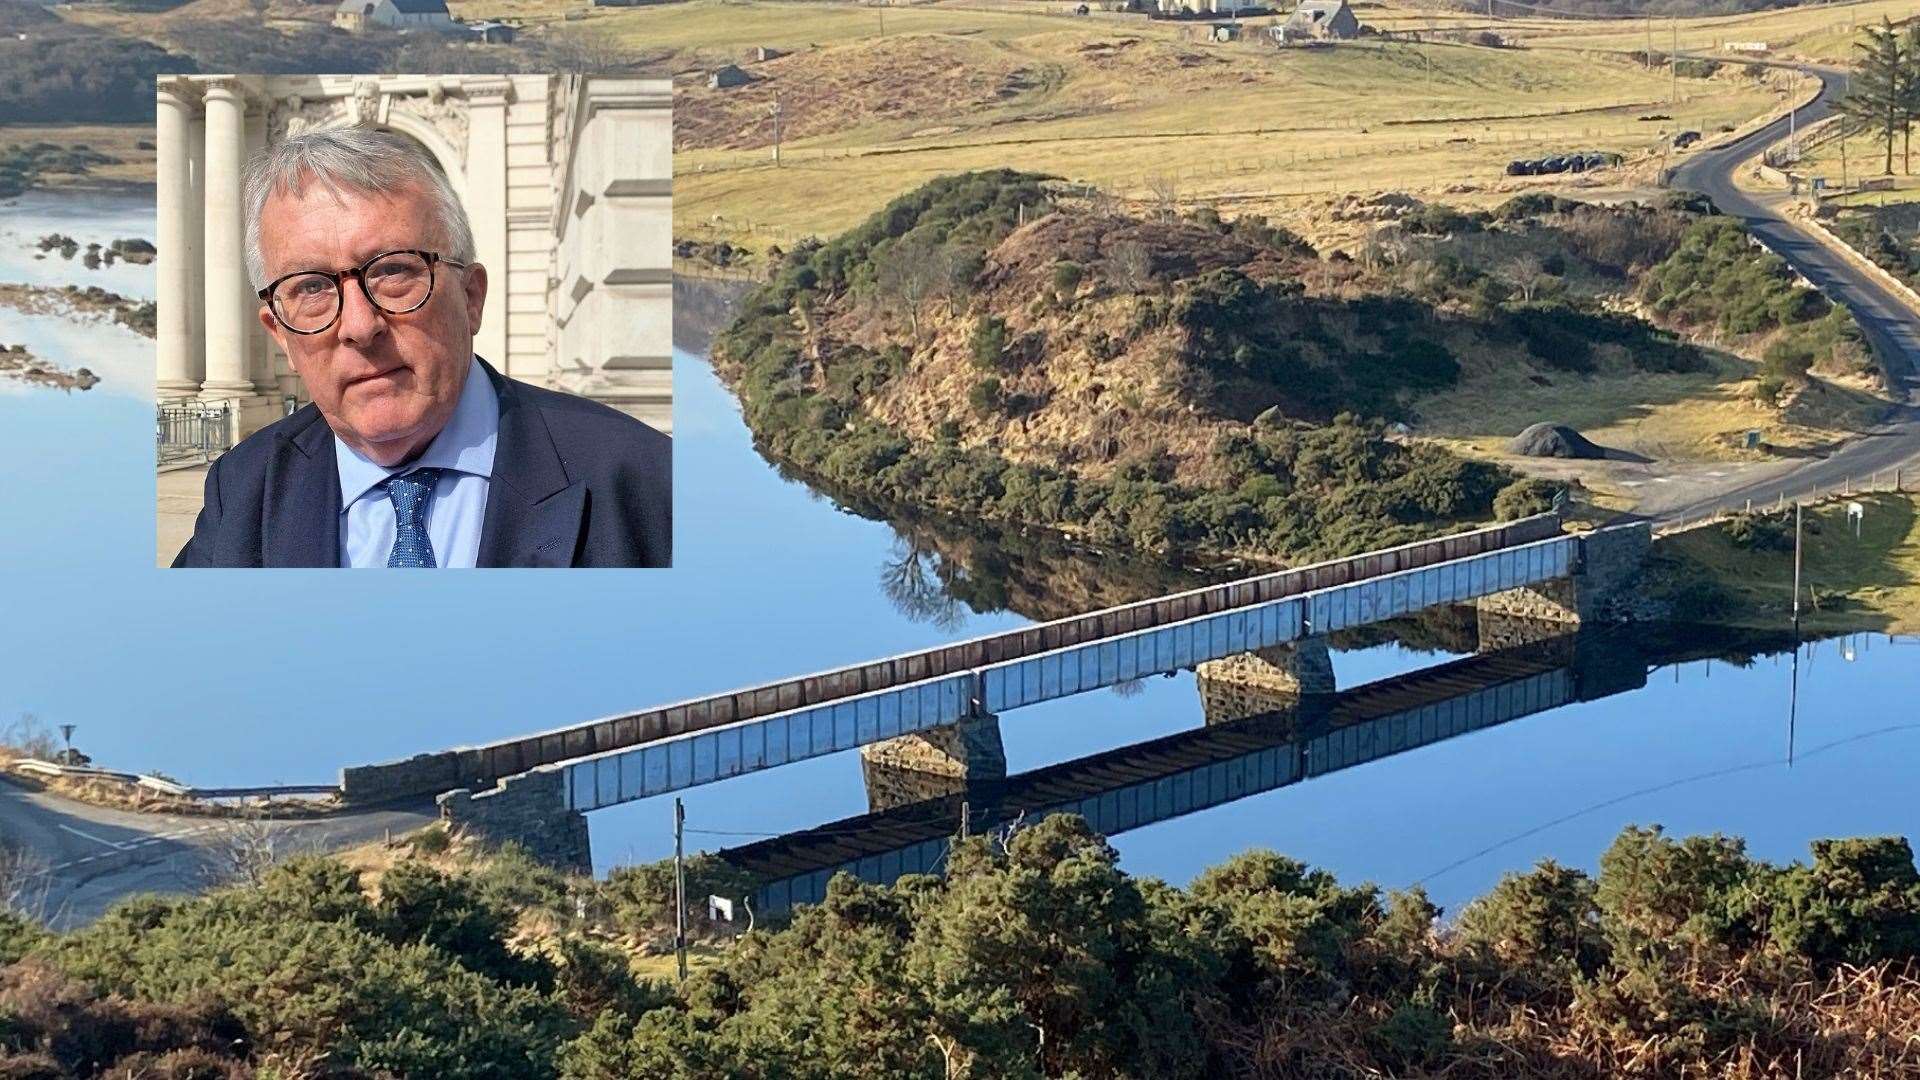 Sutherland MP Jamie Stone was taken aback at the poor condition of the Naver Bridge when he crossed it last weekend.